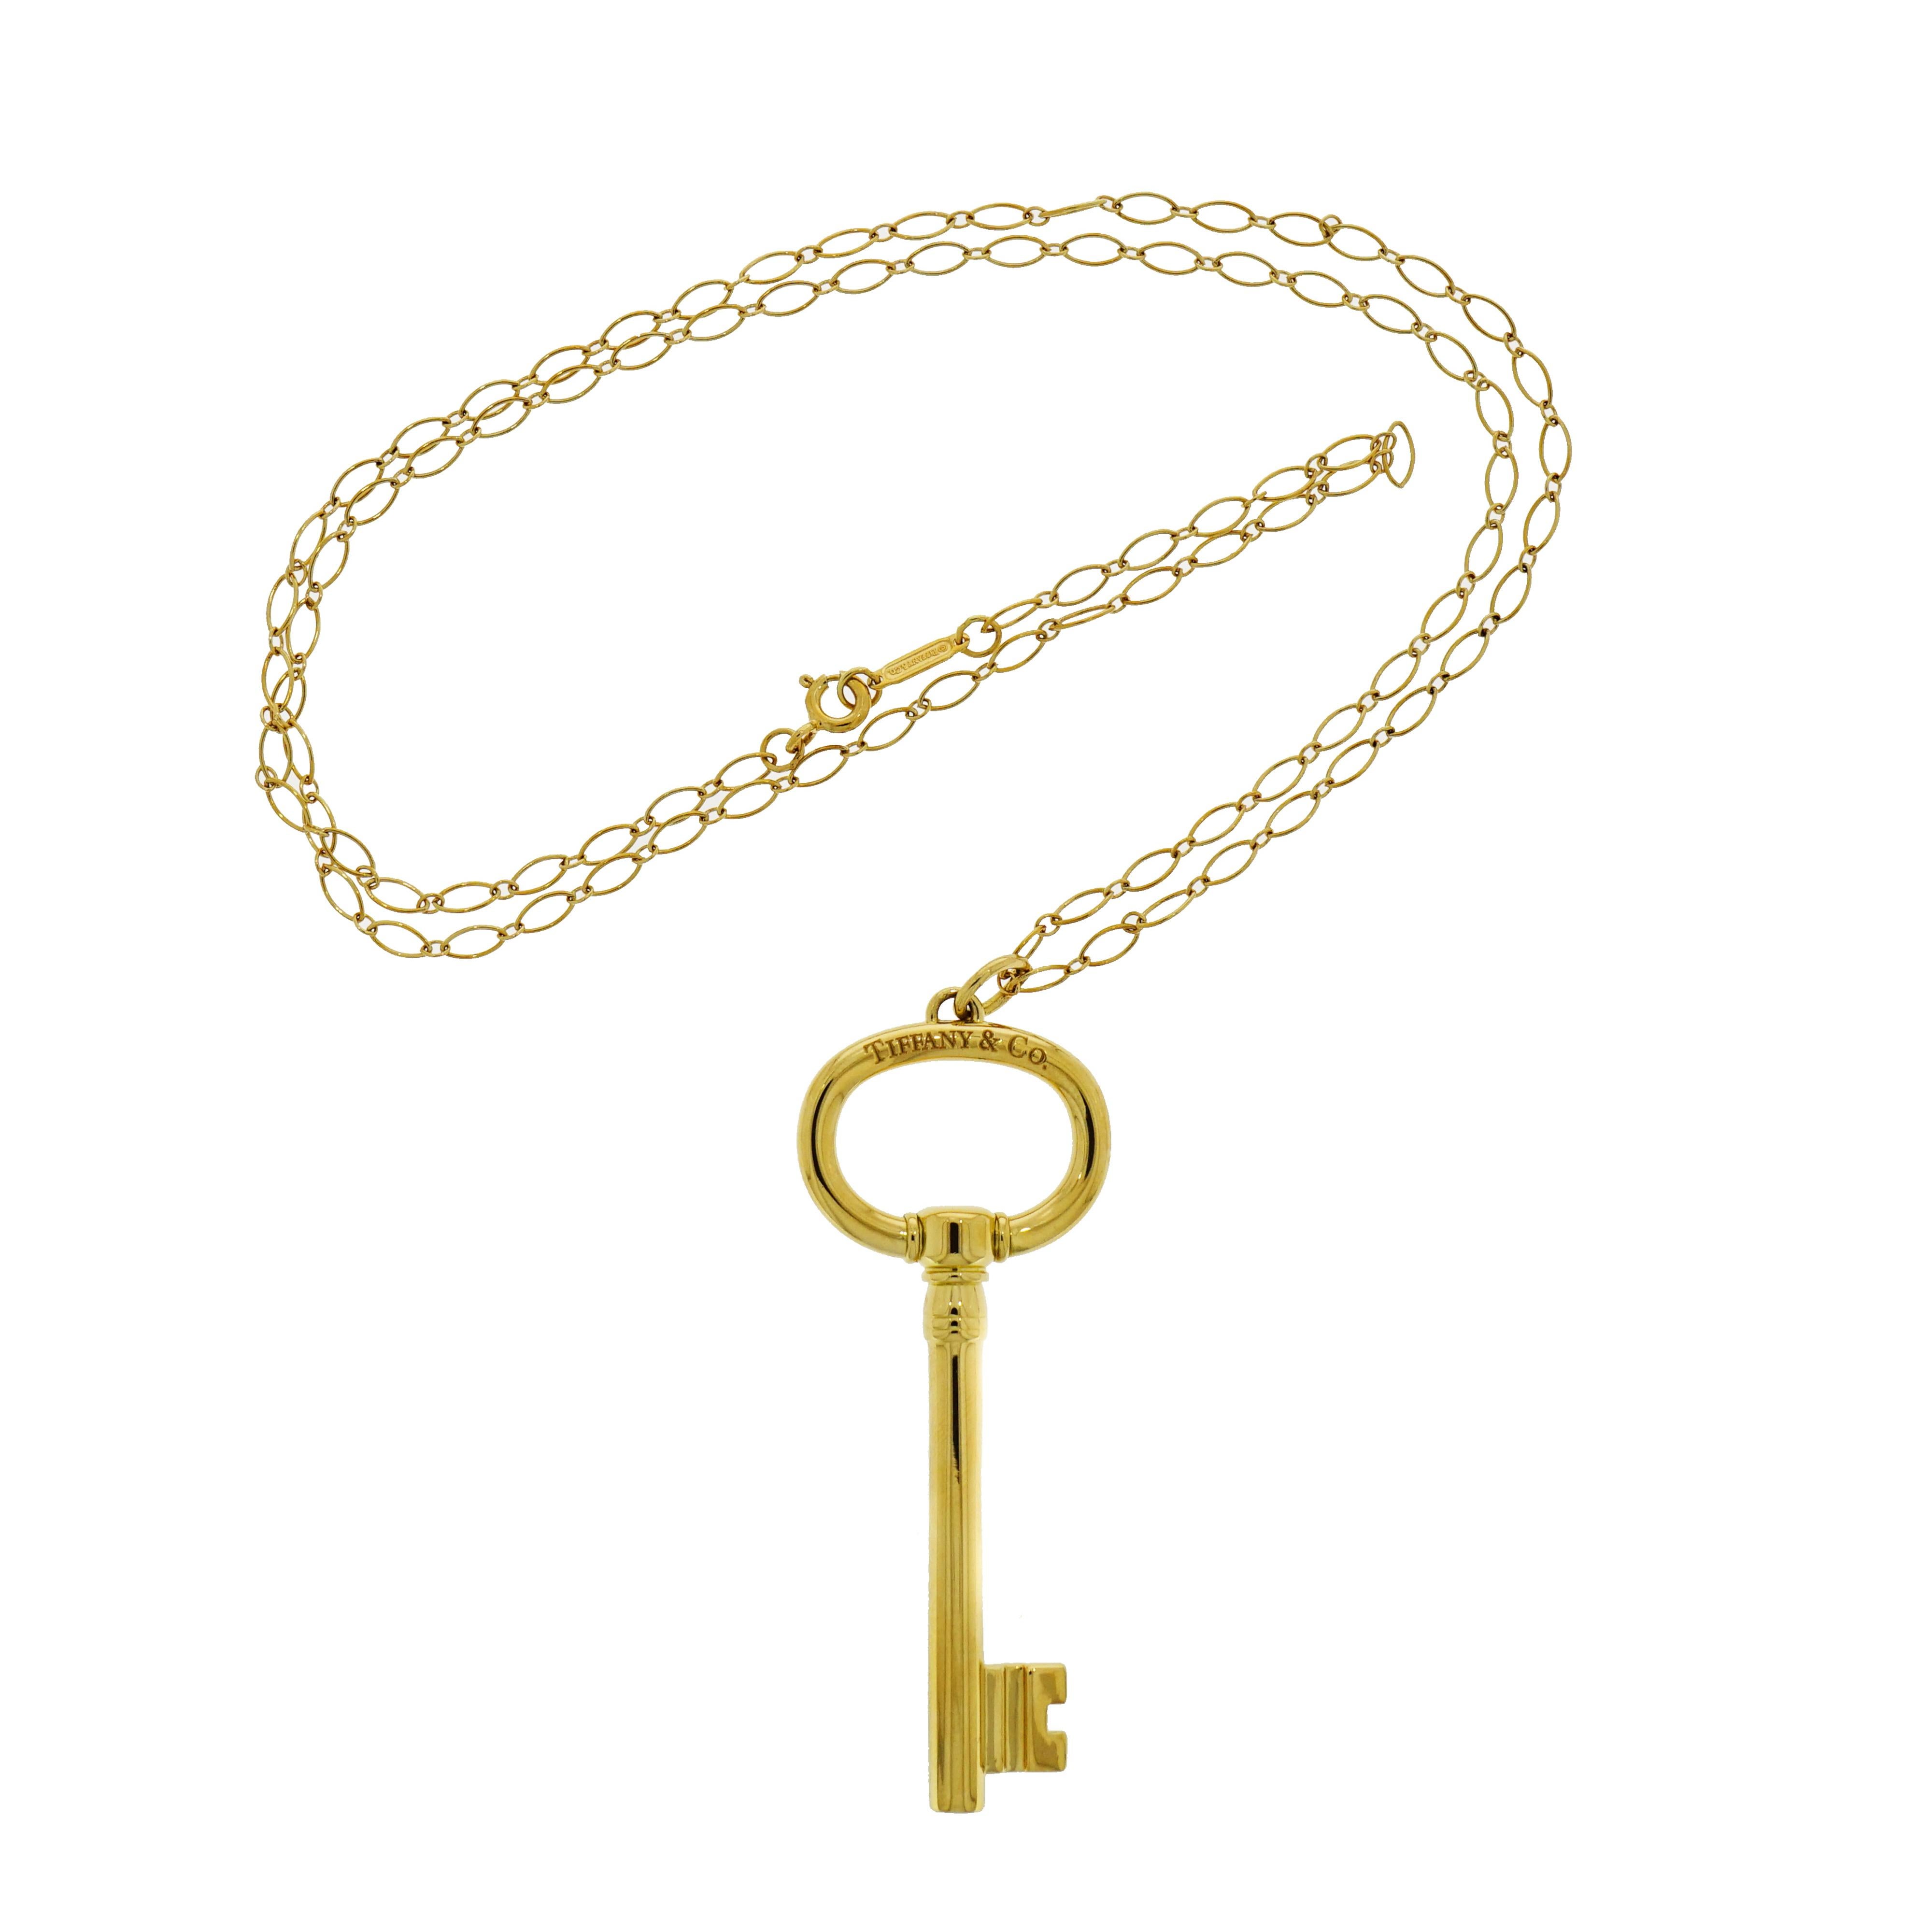 The Key is a symbol of entrusting someone with the access to one's 